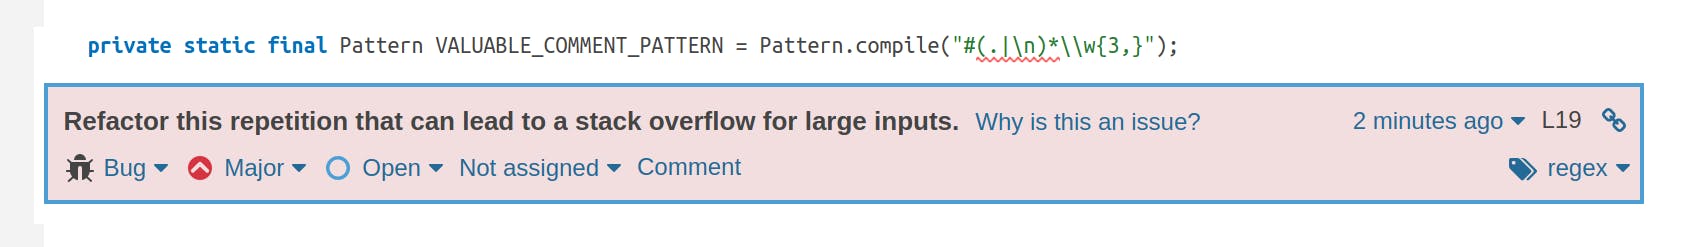 An issue is raised on a repetition in a regex which could lead to a stack overflow.